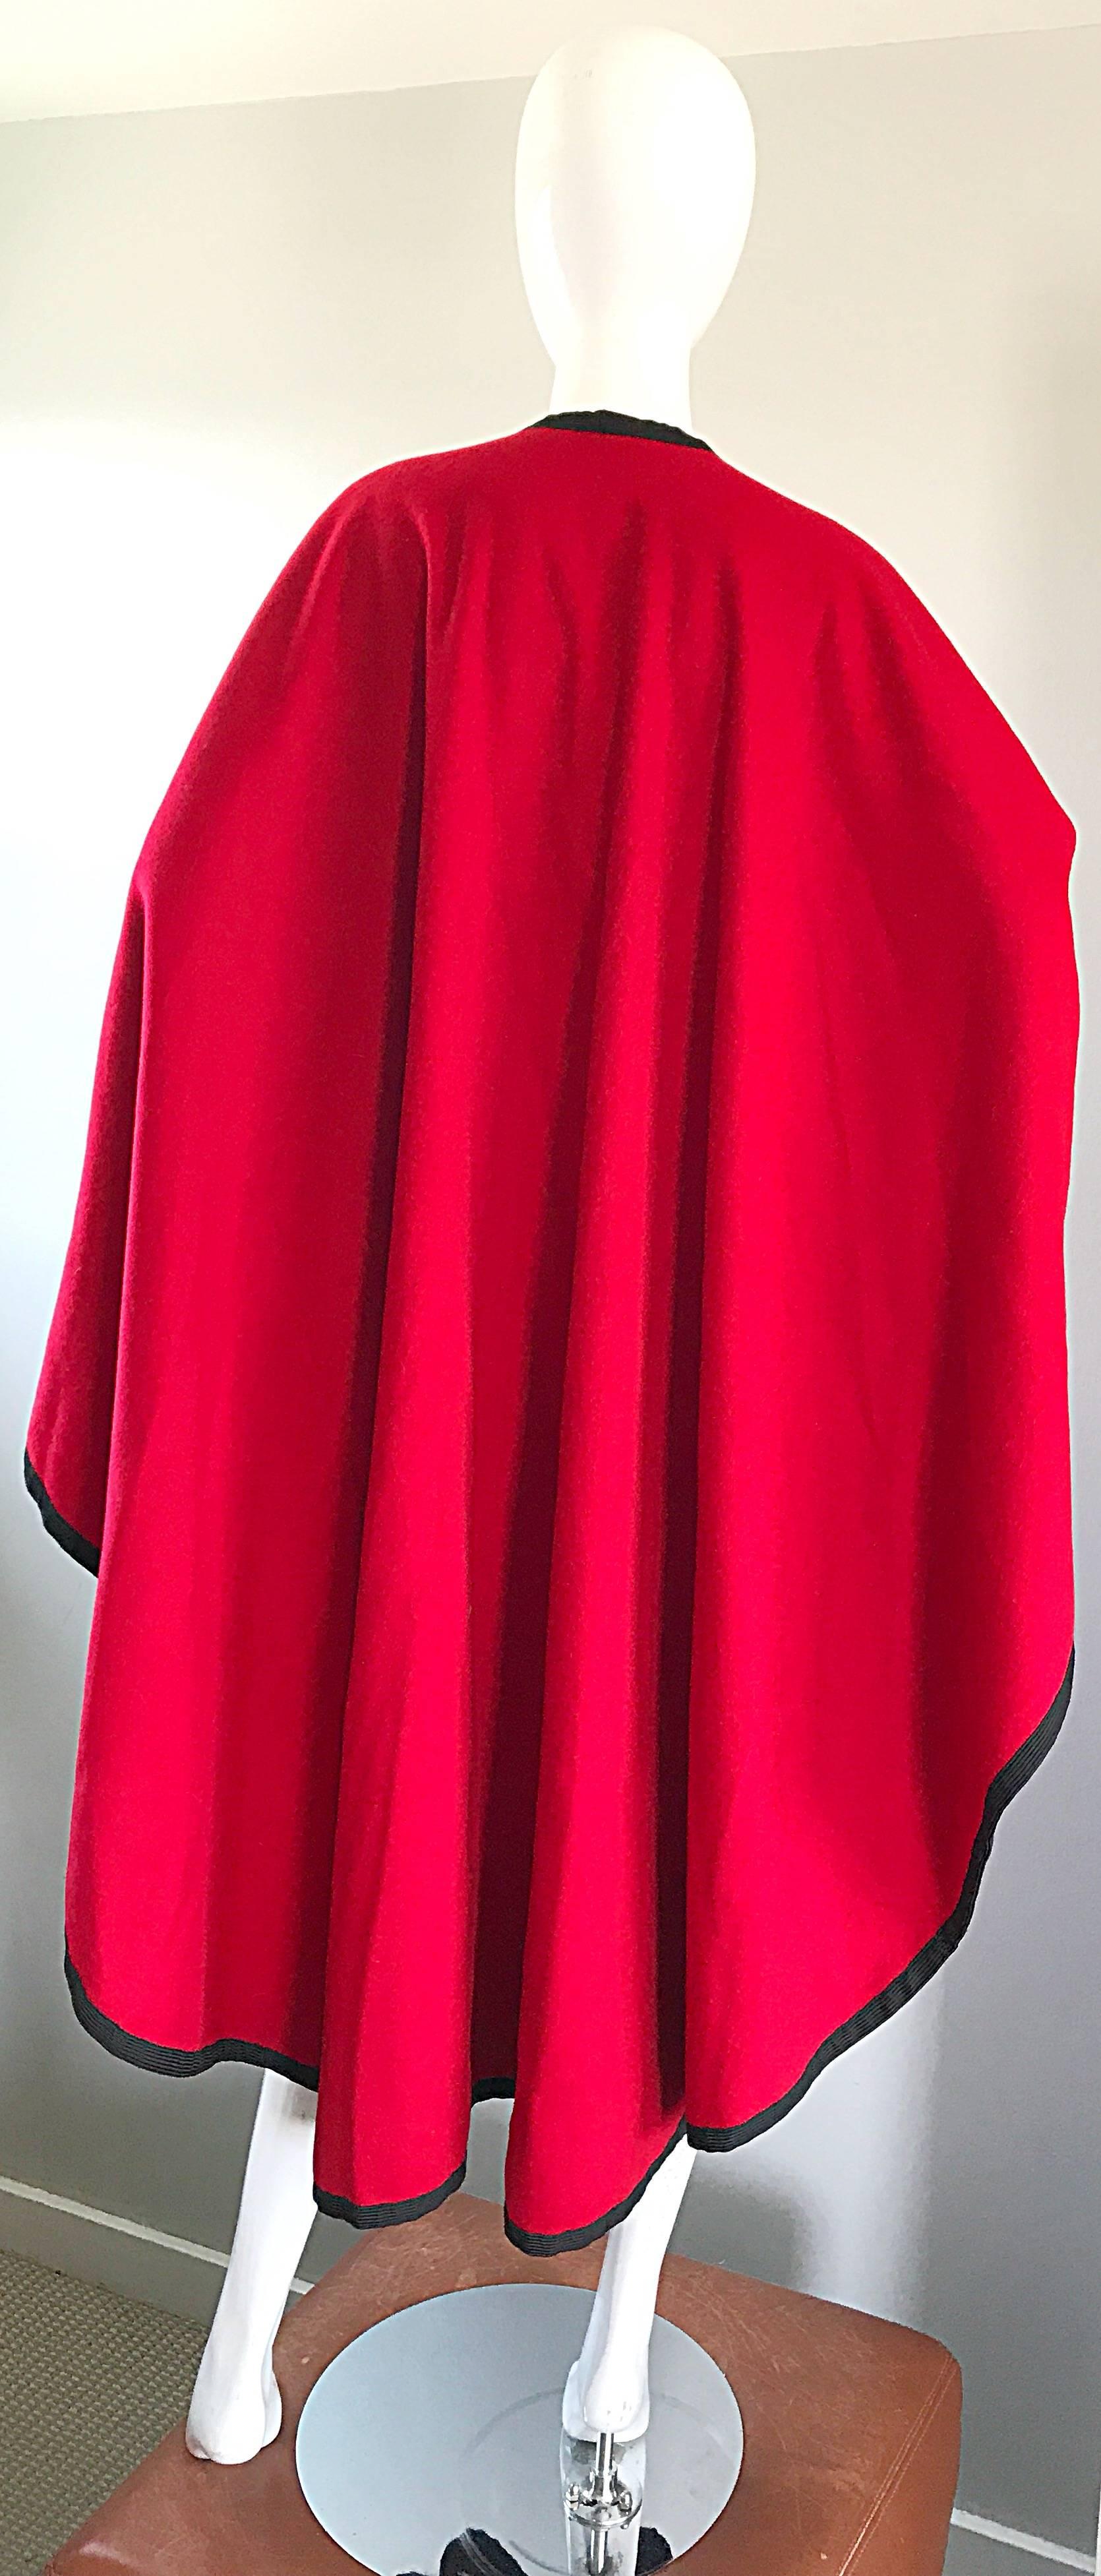 Women's or Men's Rare Vintage Yves Saint Laurent Russian Collection 1970s Red Wool Cape Jacket